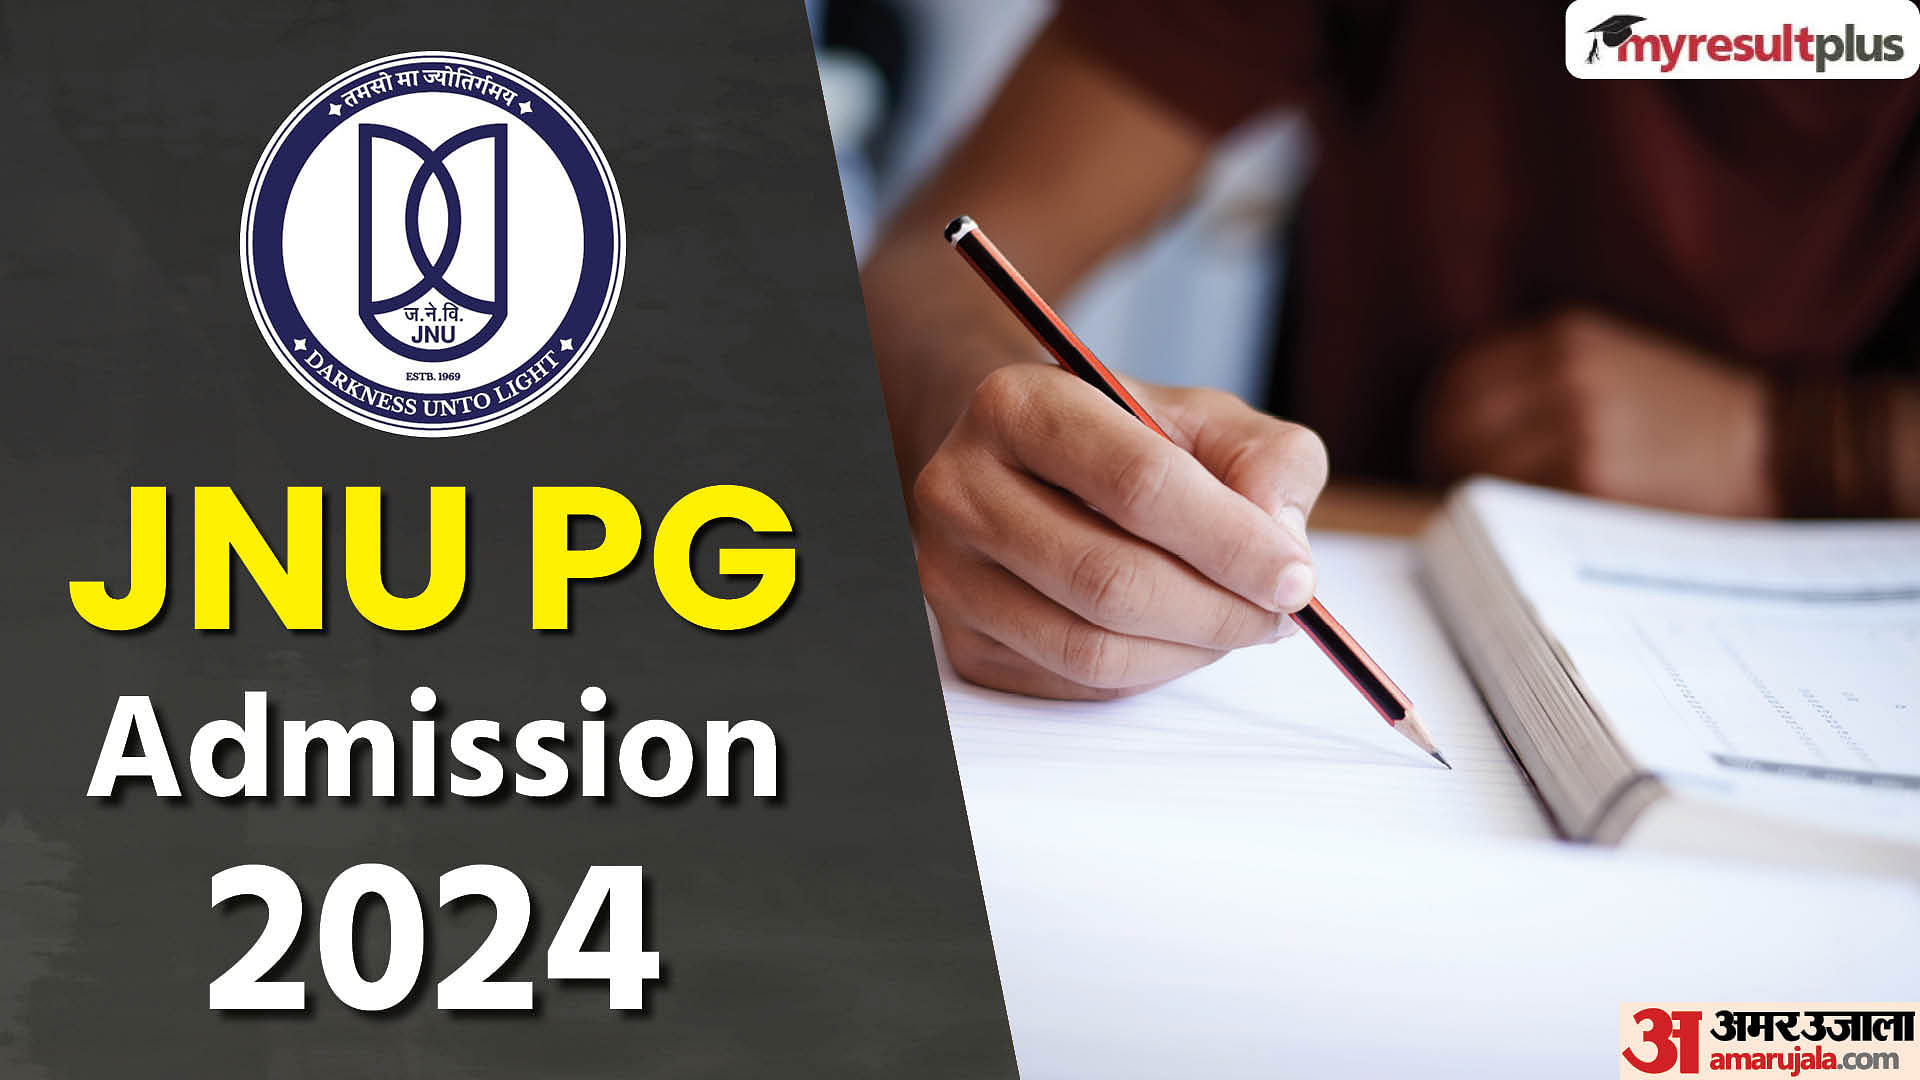 JNU PG Admission 2024: Registration window opens today, Read about the eligibility and steps to apply here